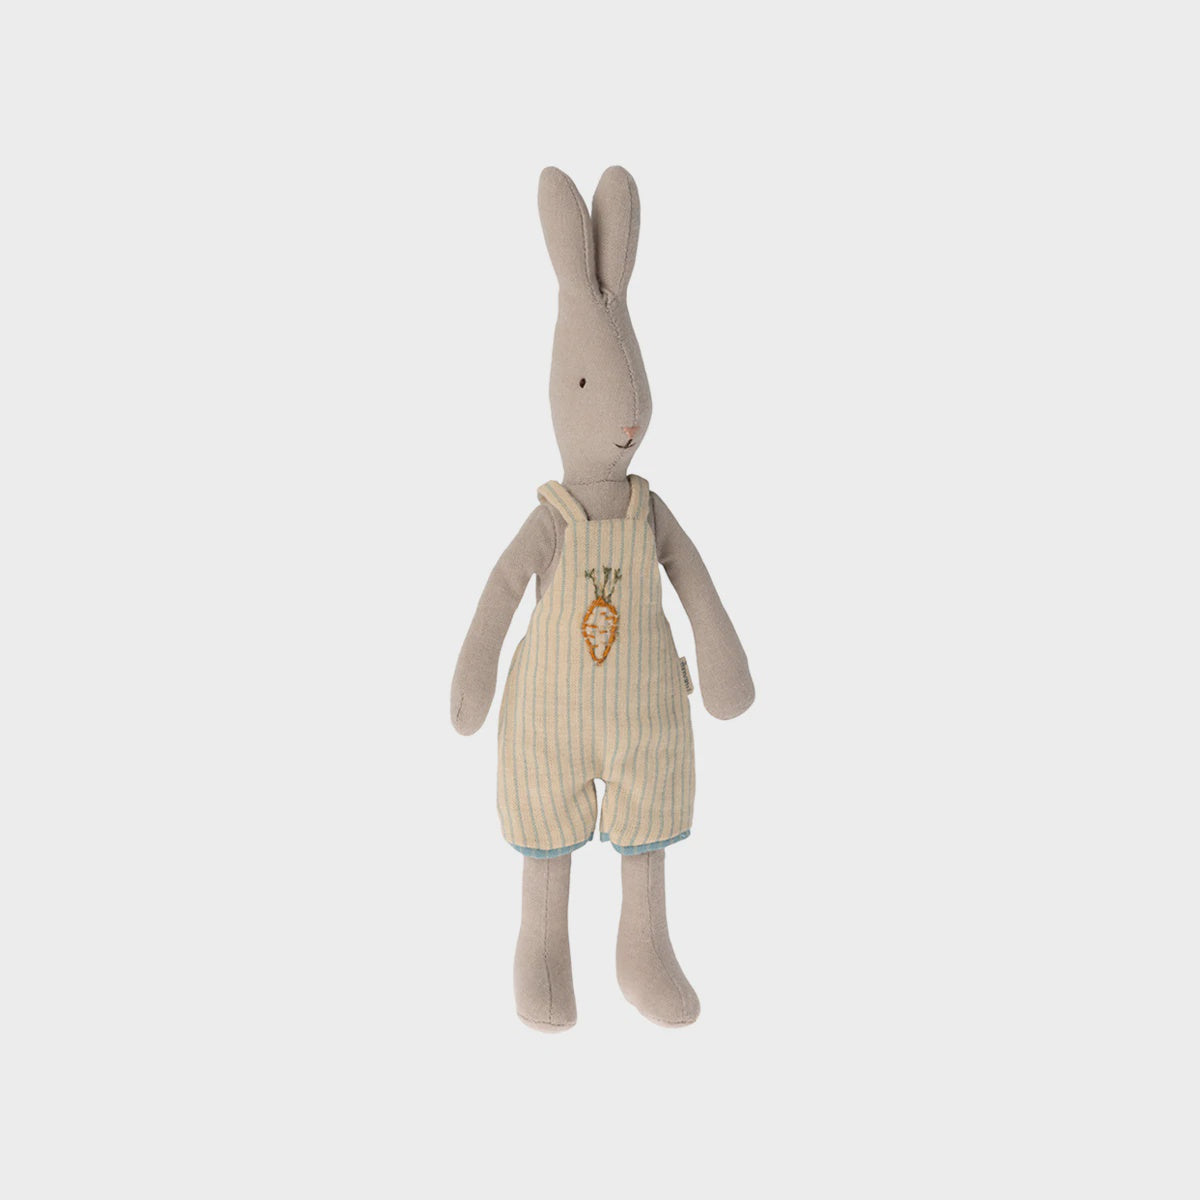 Rabbit size 1 in Overalls